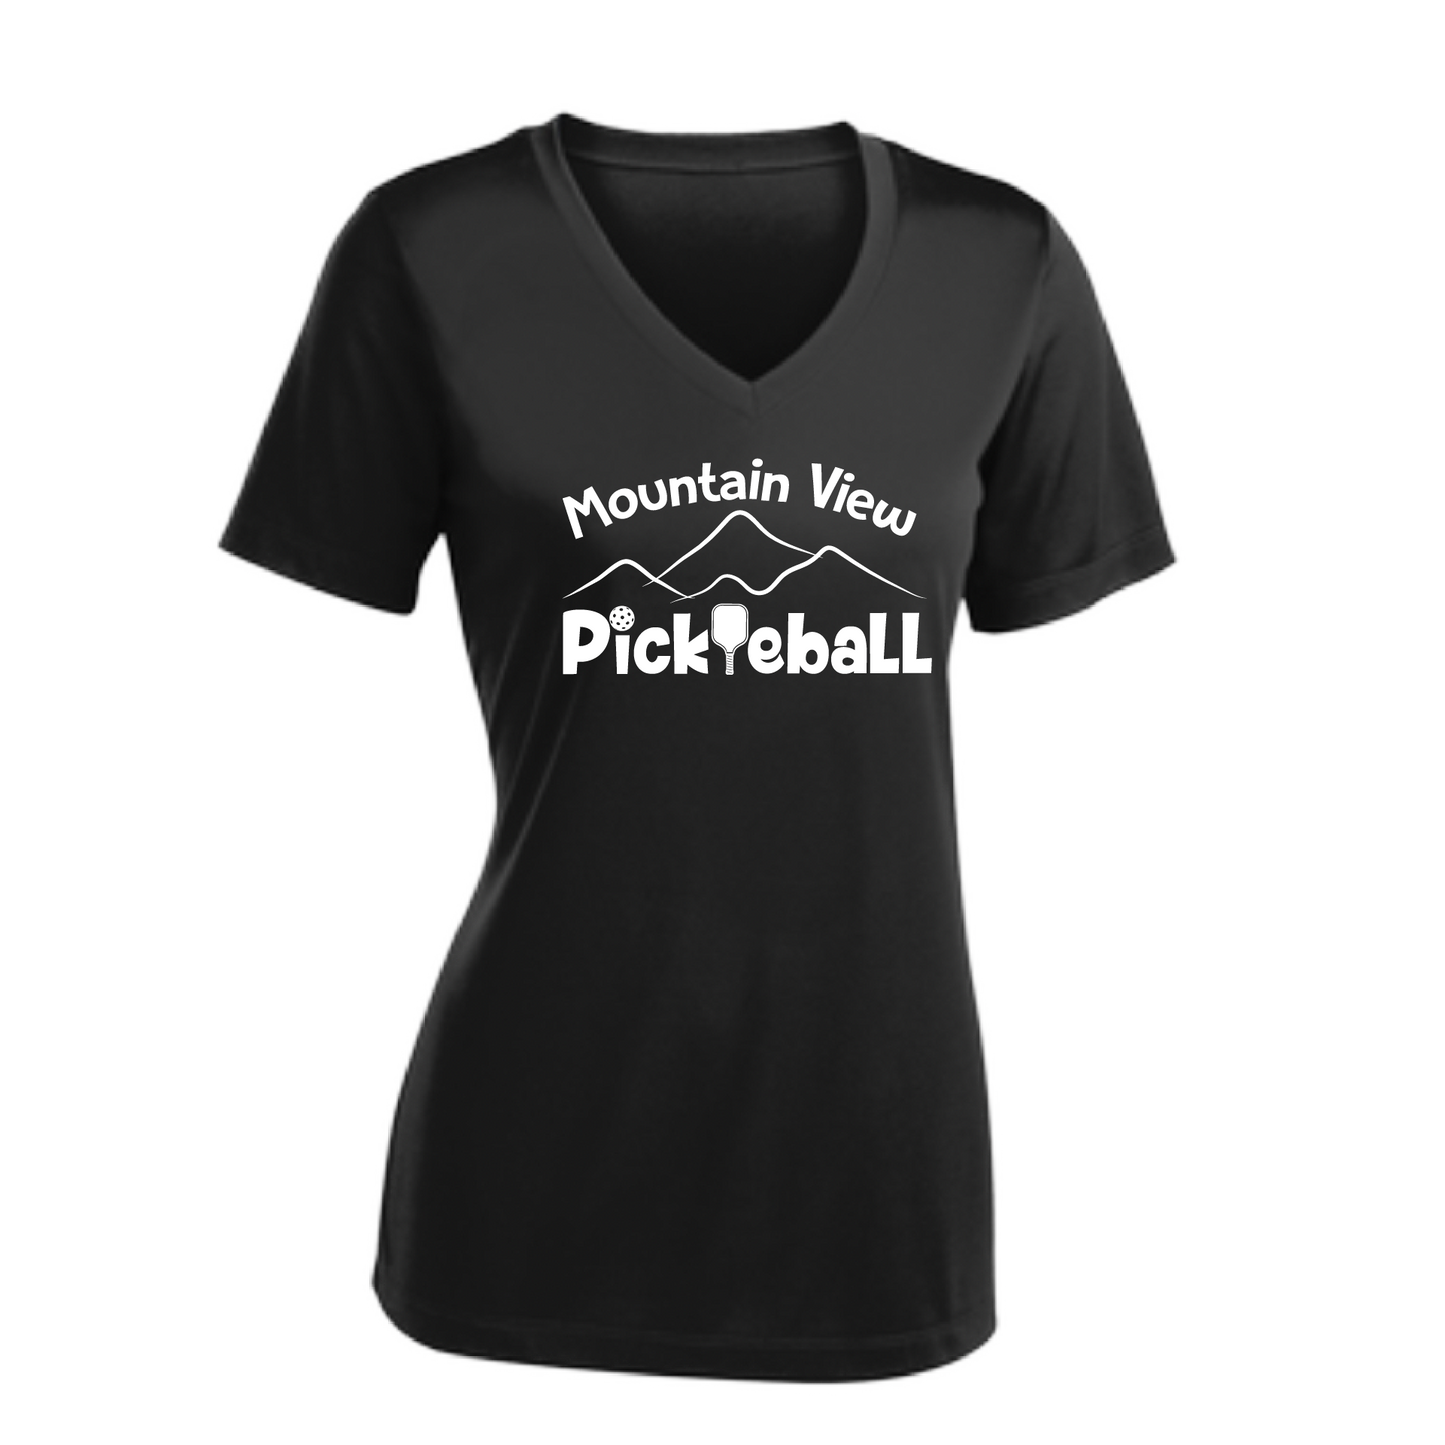 Pickleball Design: Mountain View Pickleball Club  Women's Style: Short-Sleeve V-Neck  Turn up the volume in this Women's shirt with its perfect mix of softness and attitude. Material is ultra-comfortable with moisture wicking properties and tri-blend softness. PosiCharge technology locks in color. Highly breathable and lightweight.